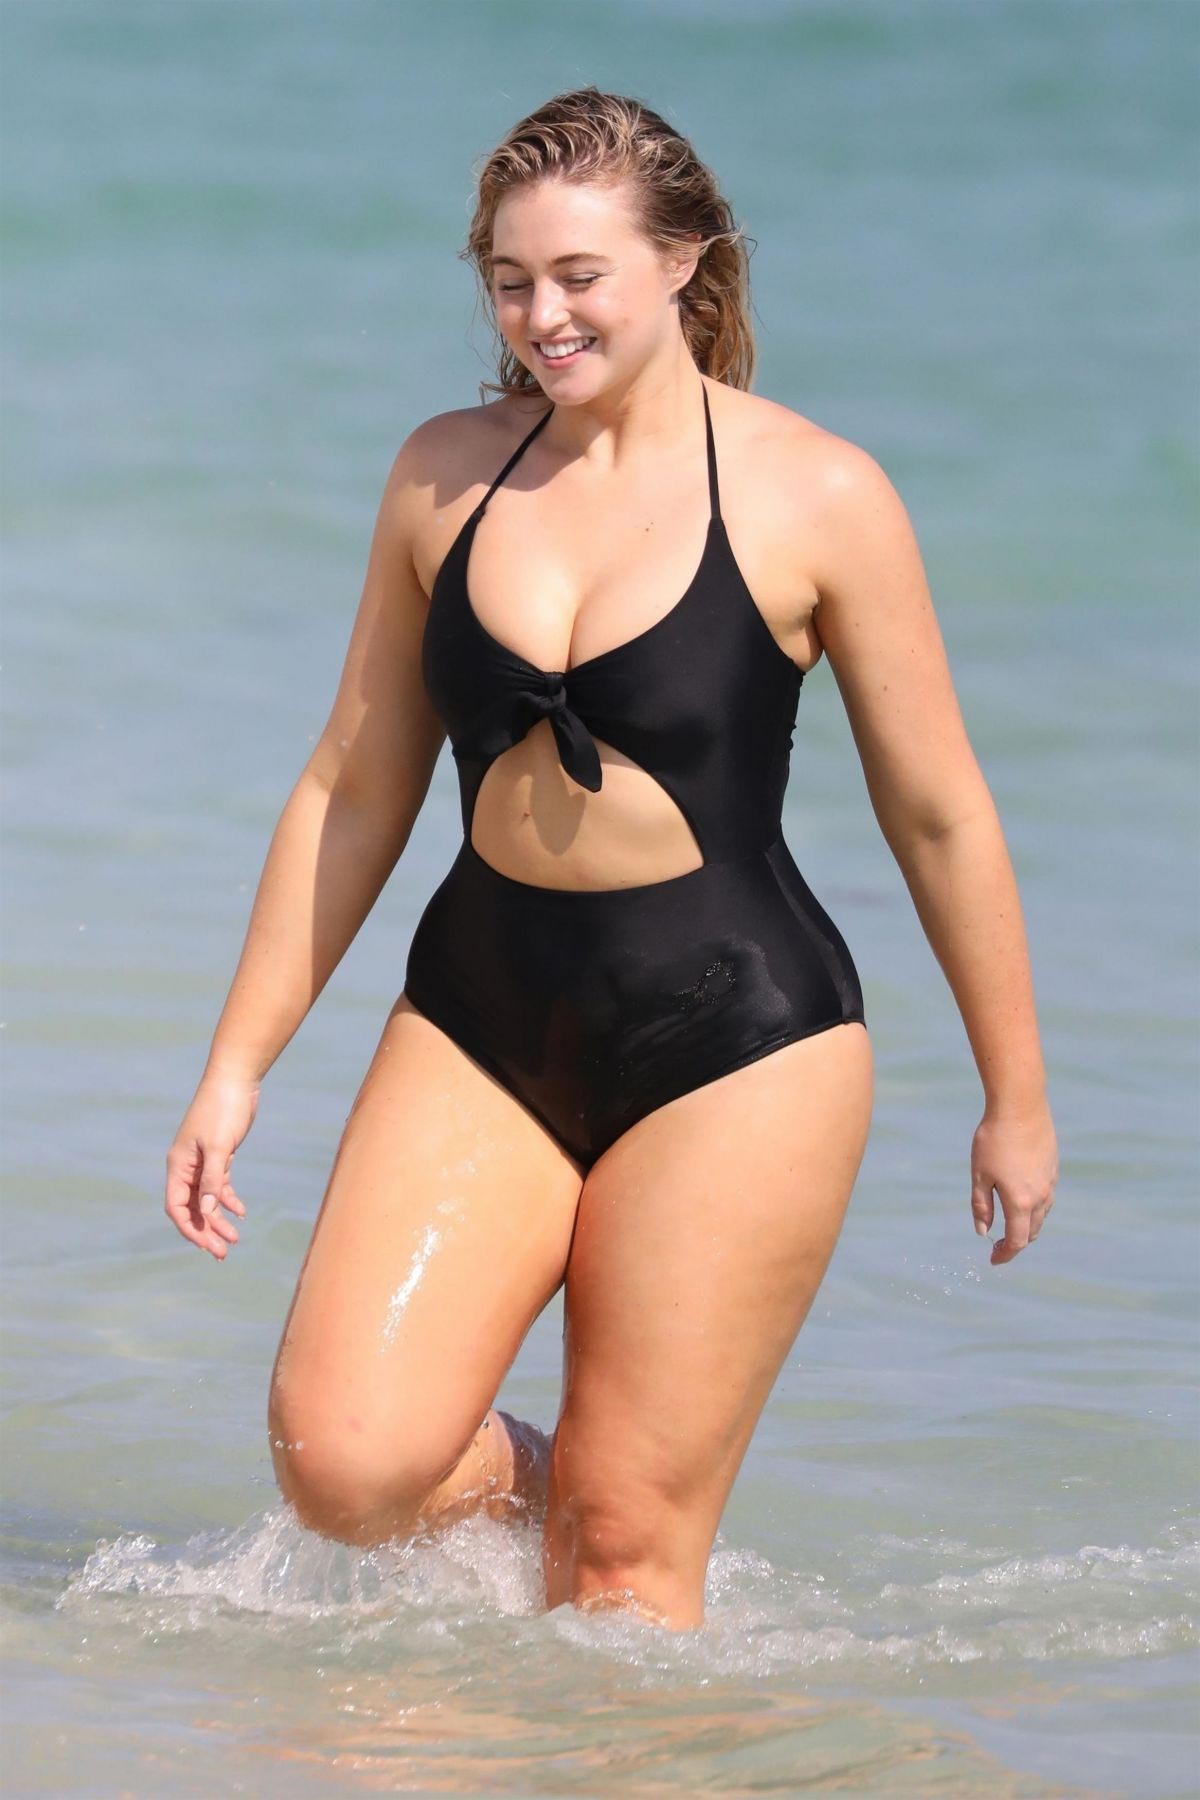 Iskra Lawrence wears Black Bikini for Aerie Photoshoot at a Beach in Miami 2018/11/26